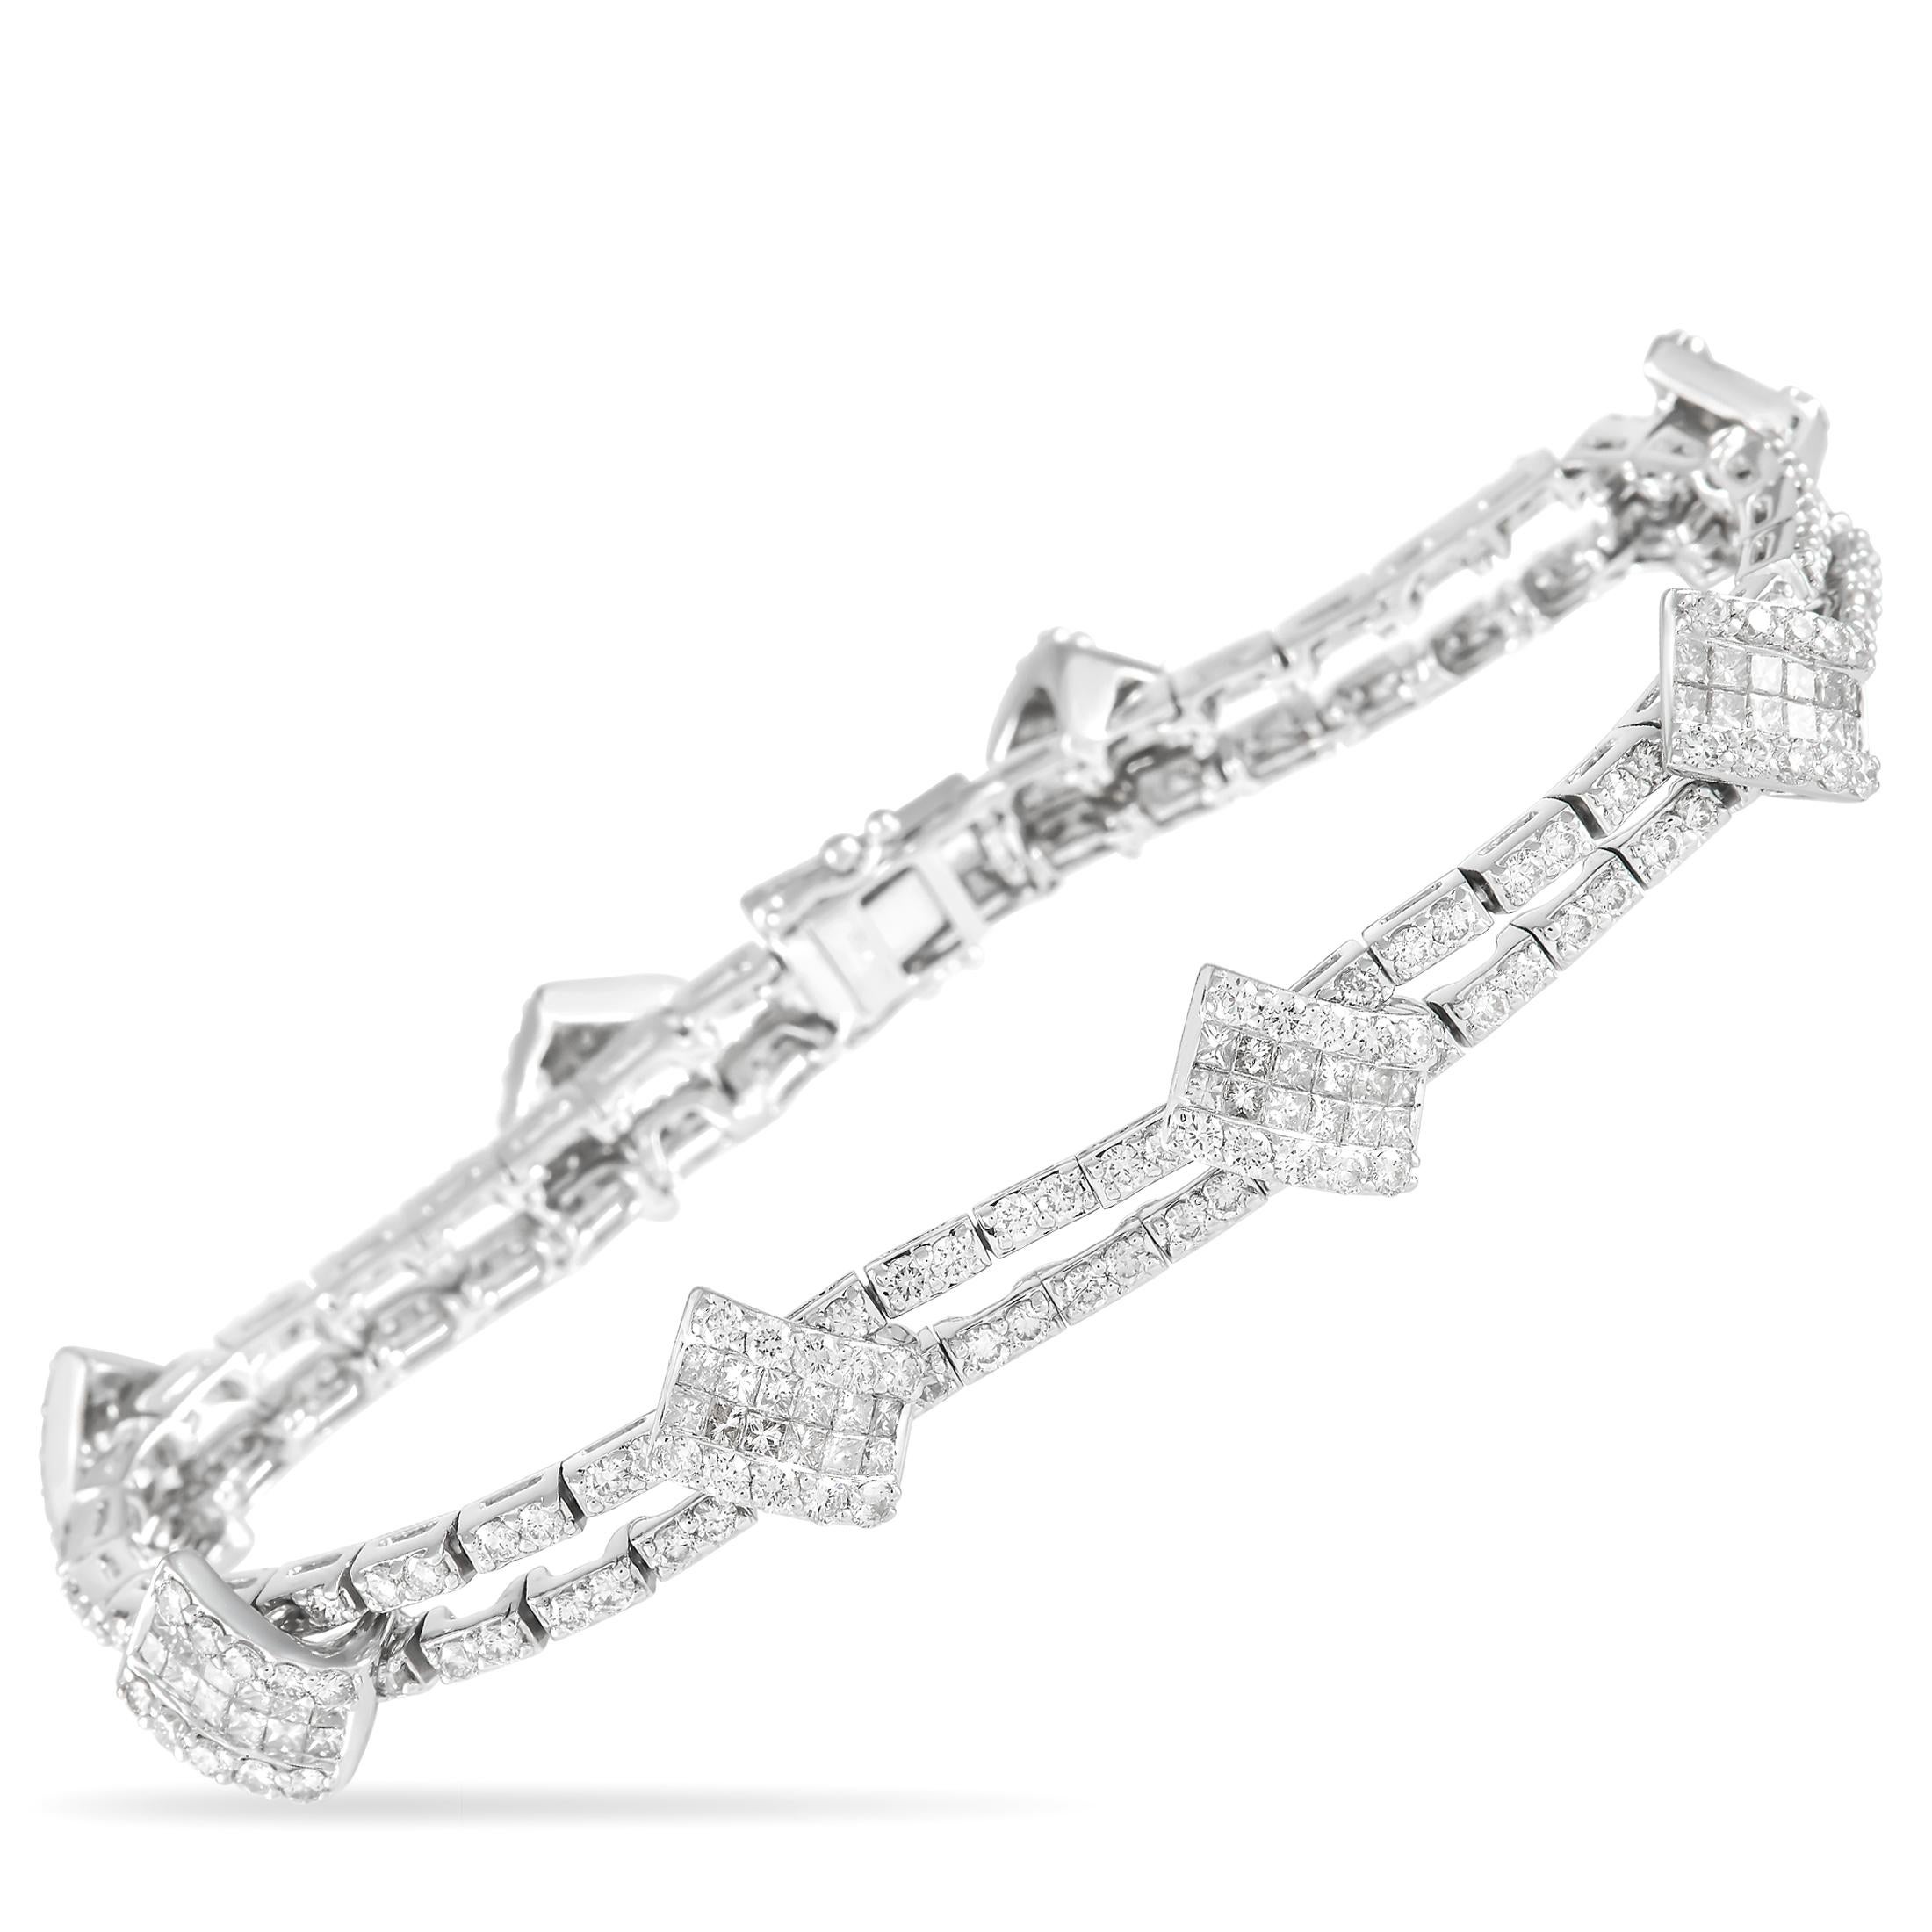 Sleek and delicate, this luxury bracelet will always make a statement. This piece measures 7.5” long and comes complete with a secure box tab insert clasp. An understated 18K White Gold setting provides the perfect foundation for diamonds with a